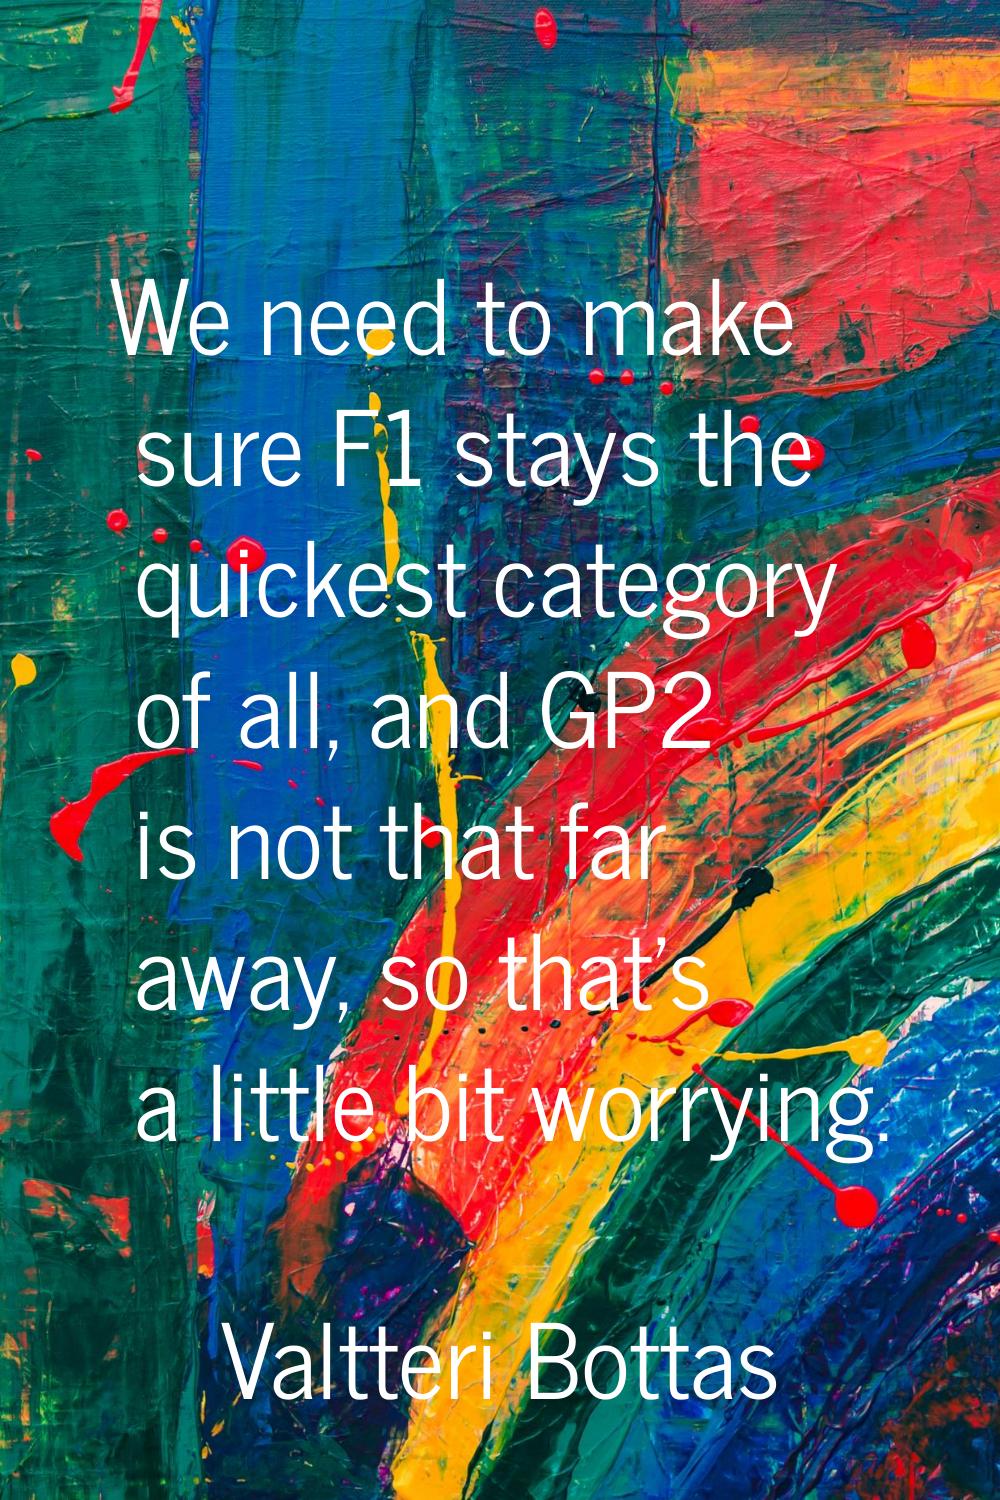 We need to make sure F1 stays the quickest category of all, and GP2 is not that far away, so that's